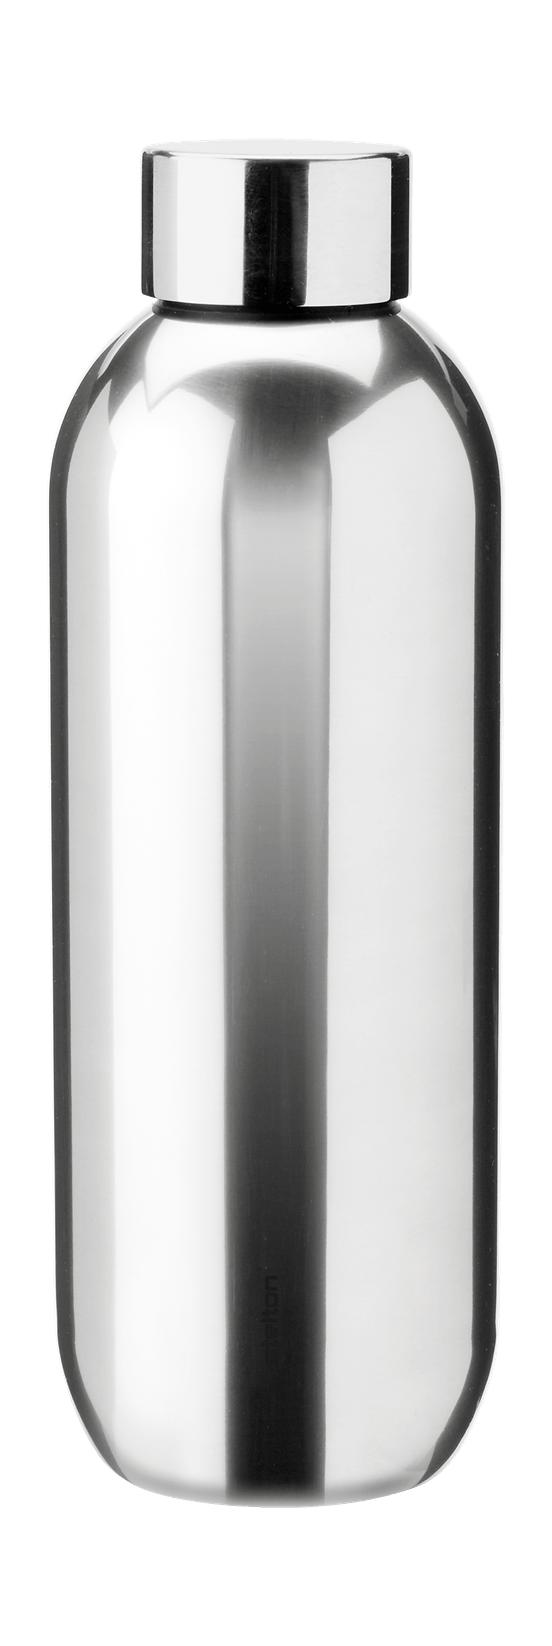 Stelton Keep Cool Thermosflasche 0,6 L